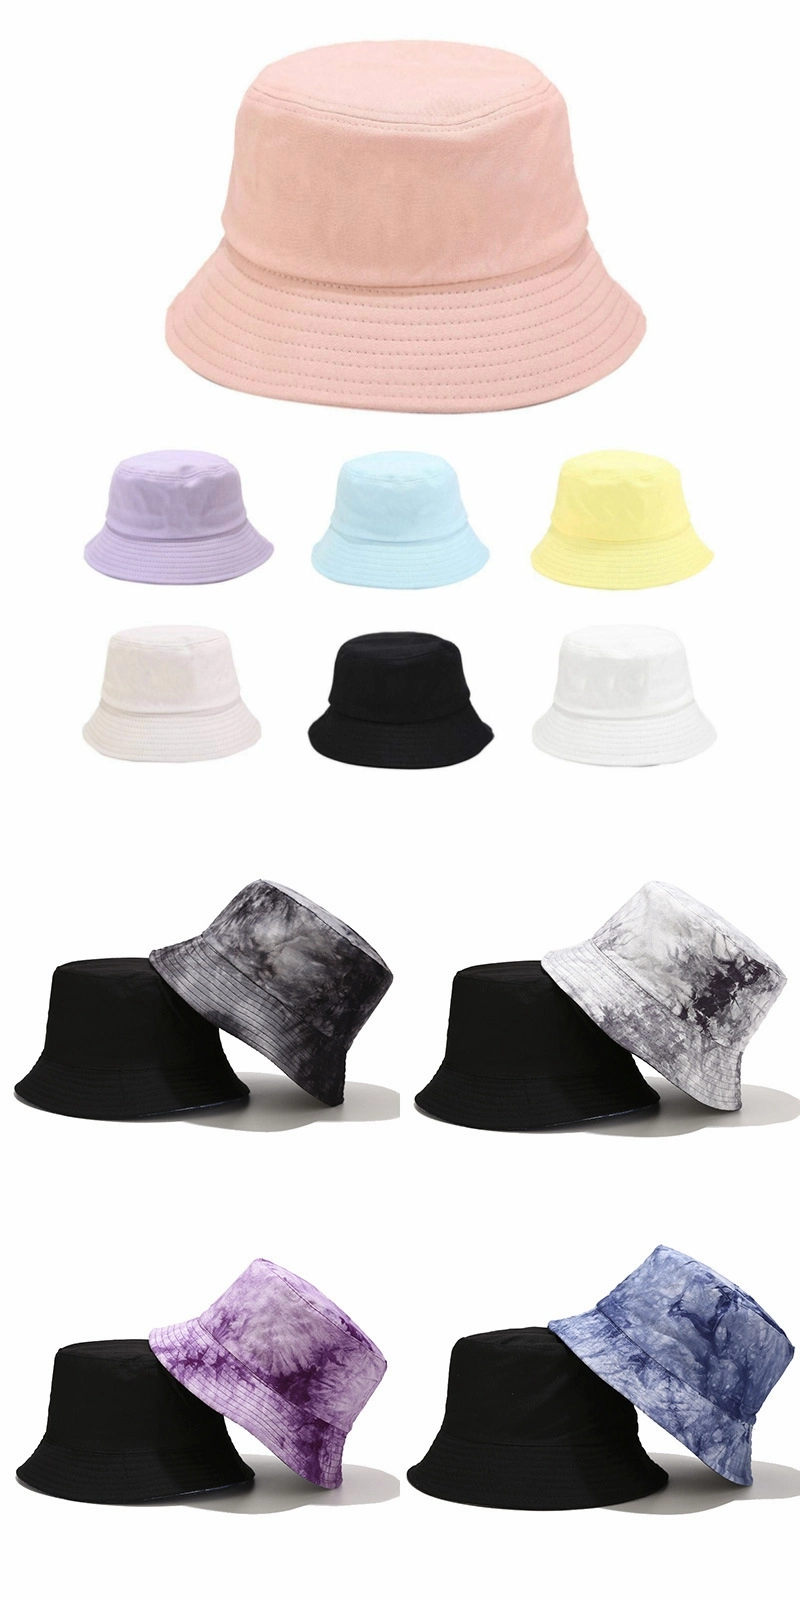 Wholesale 100% Cotton Good Quality Terry Towel Bucket Hat Printed or Embroidery Your Custom Logo